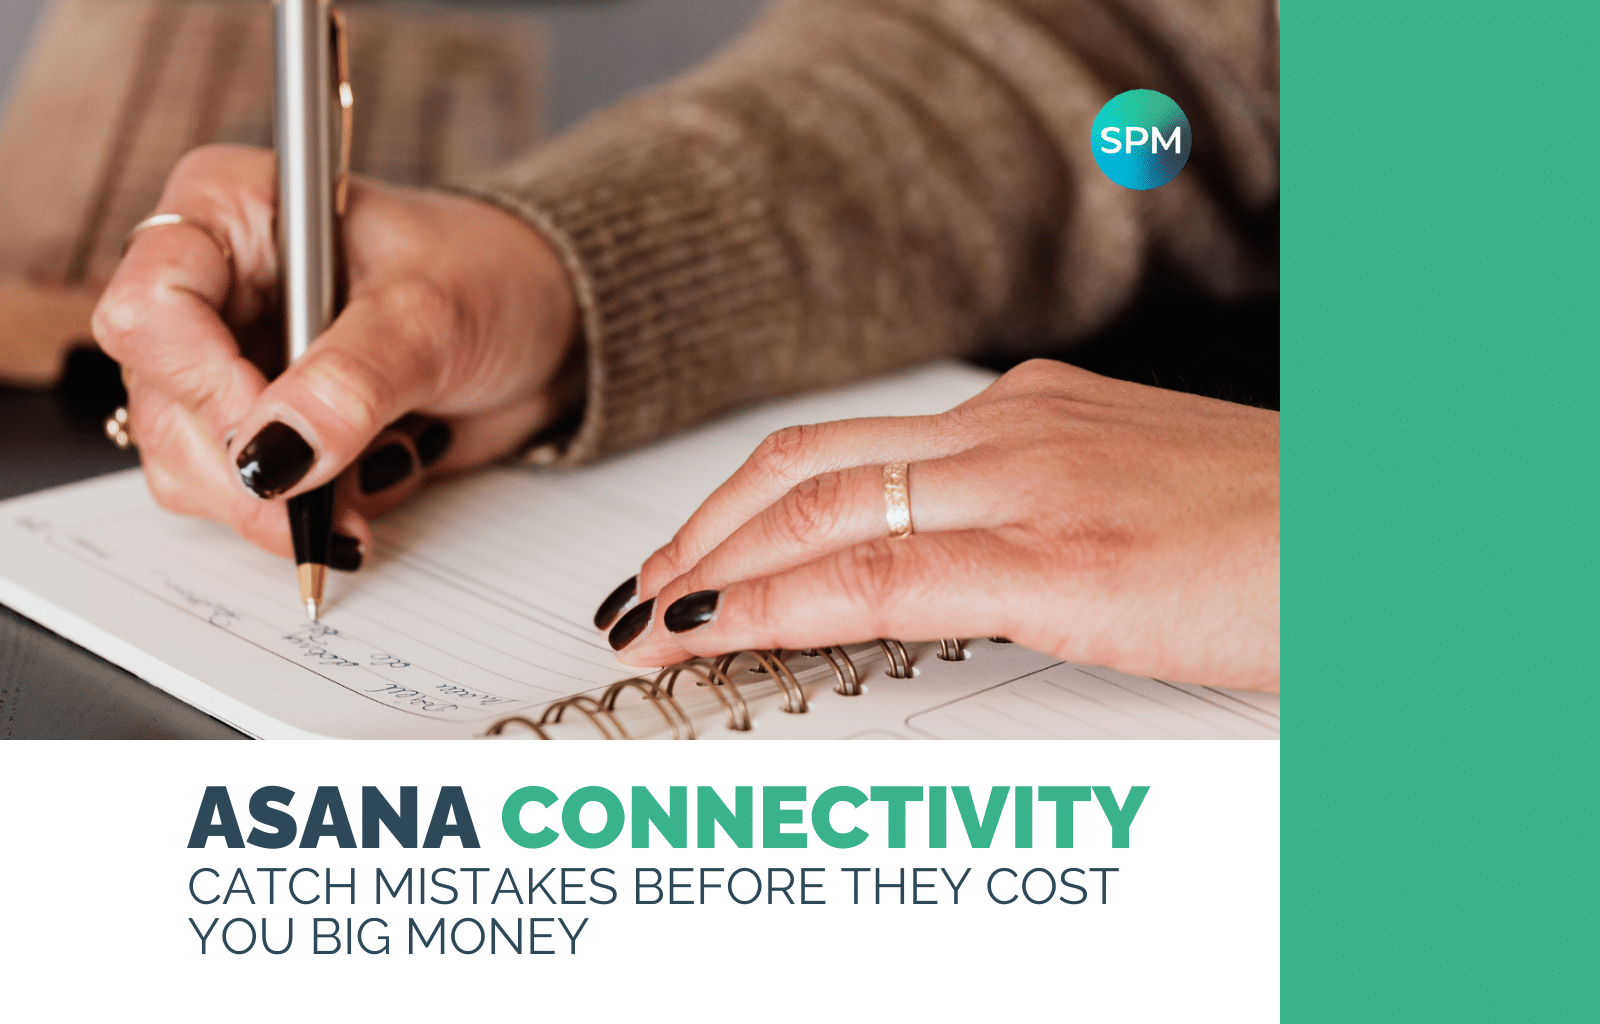 Asana Connectivity Catch mistakes before they cost you big money